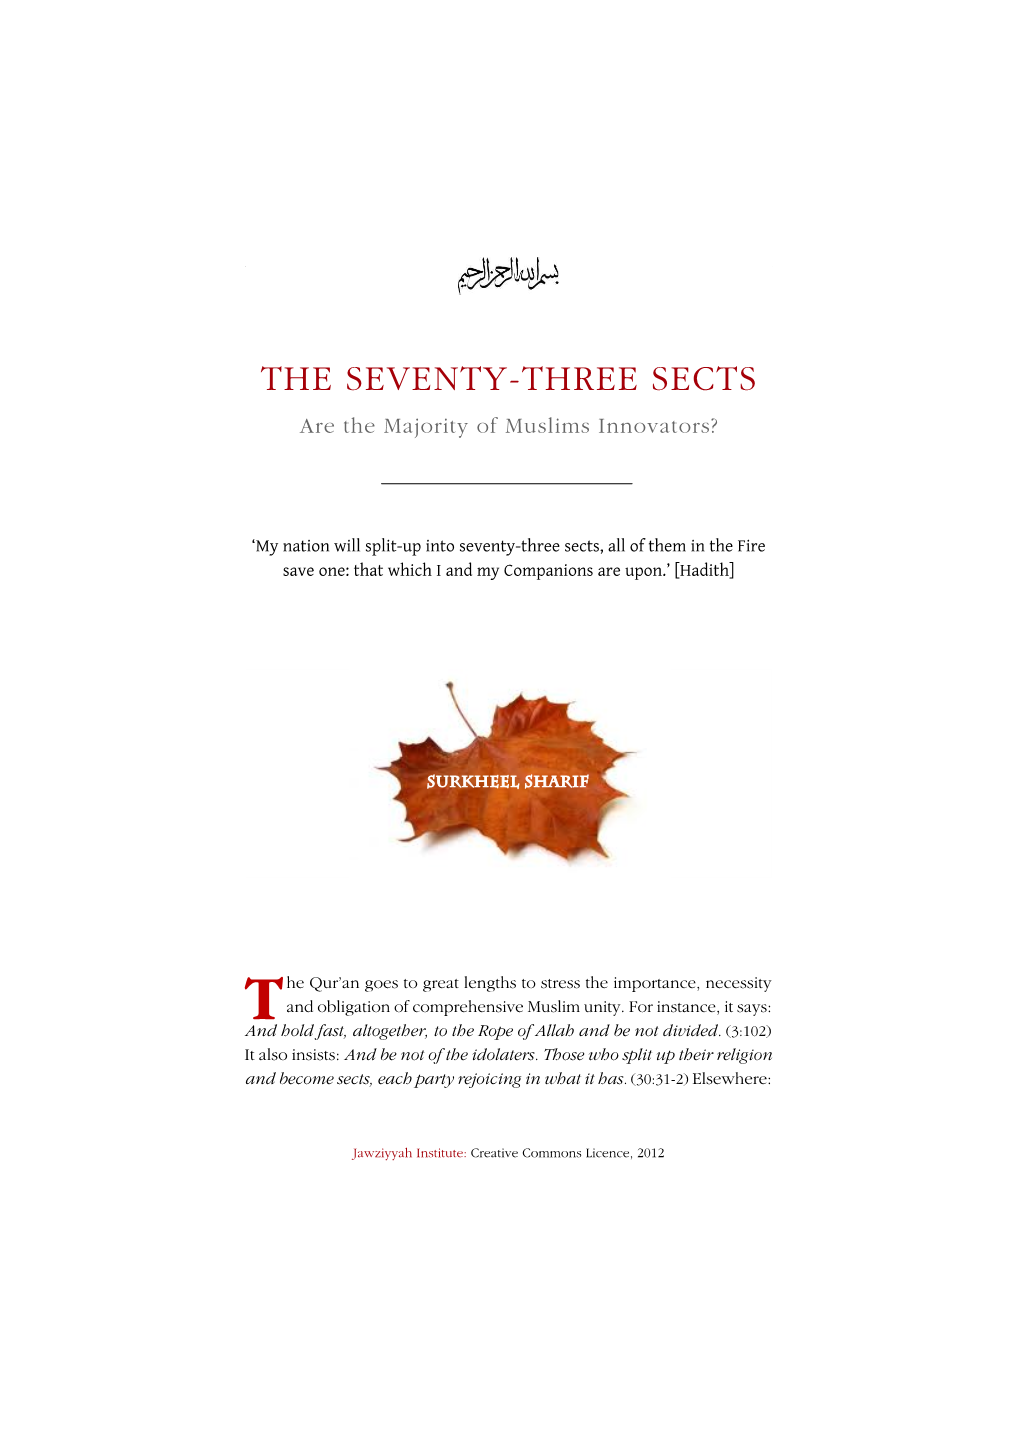 SEVENTY-THREE SECTS Are the Majority of Muslims Innovators?